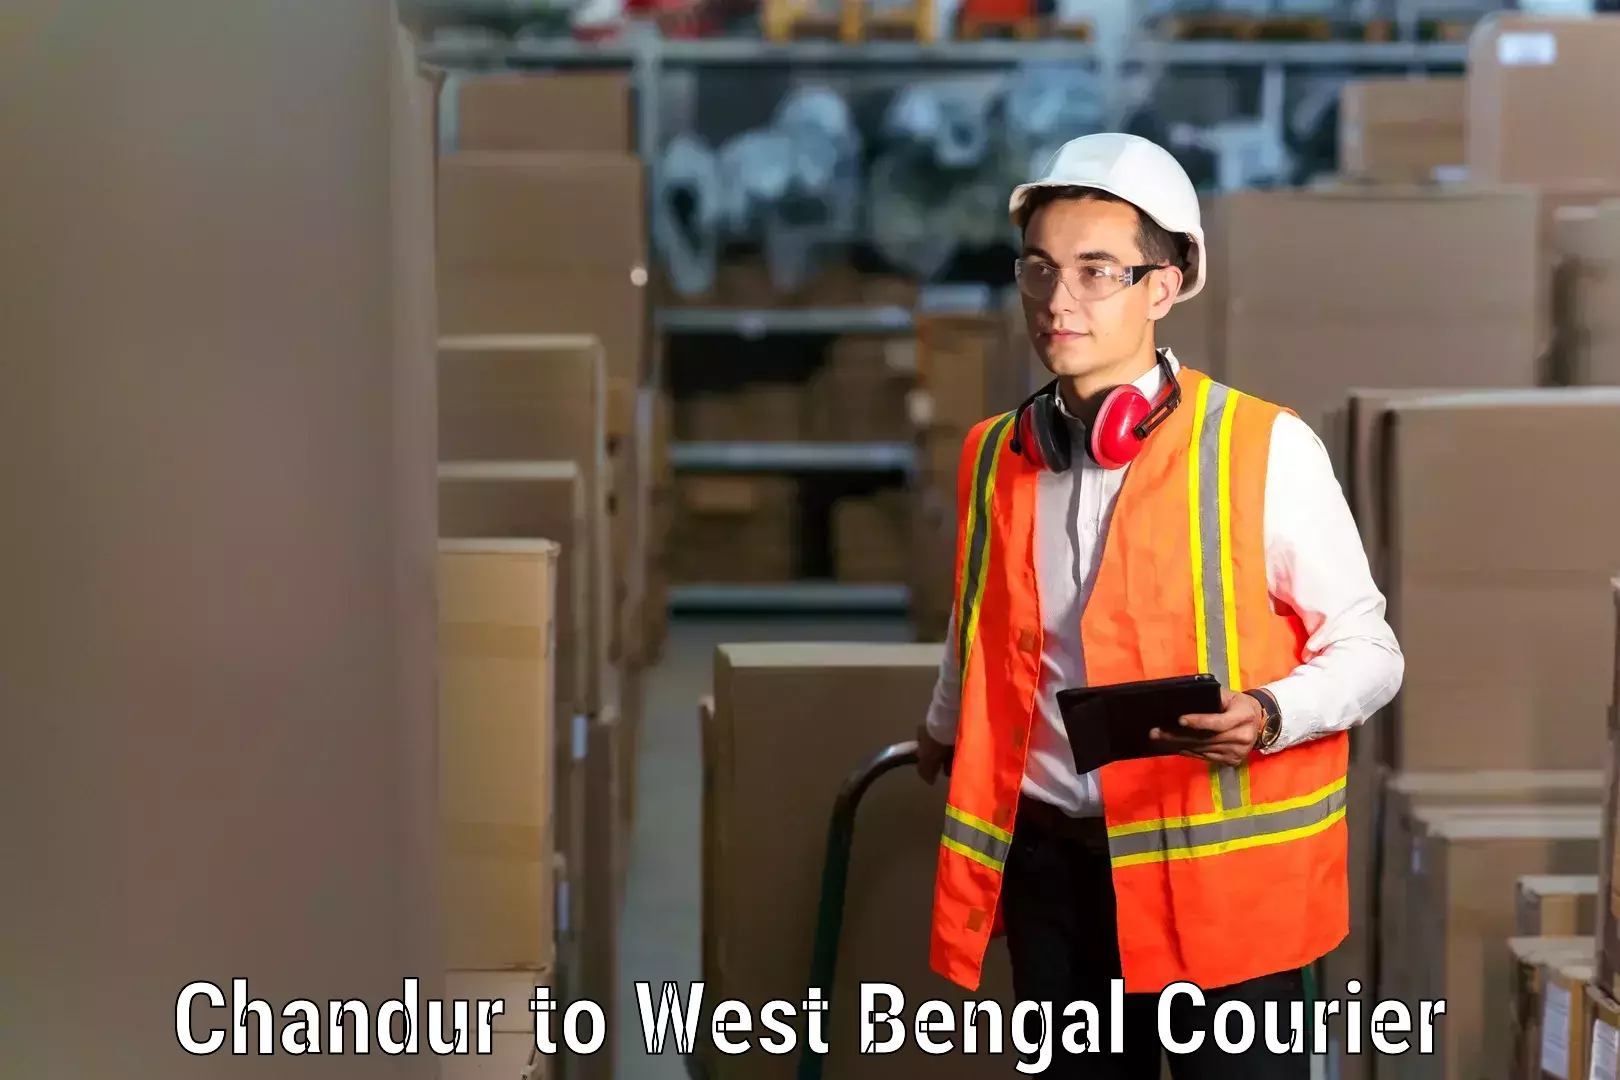 Specialized moving company Chandur to West Bengal